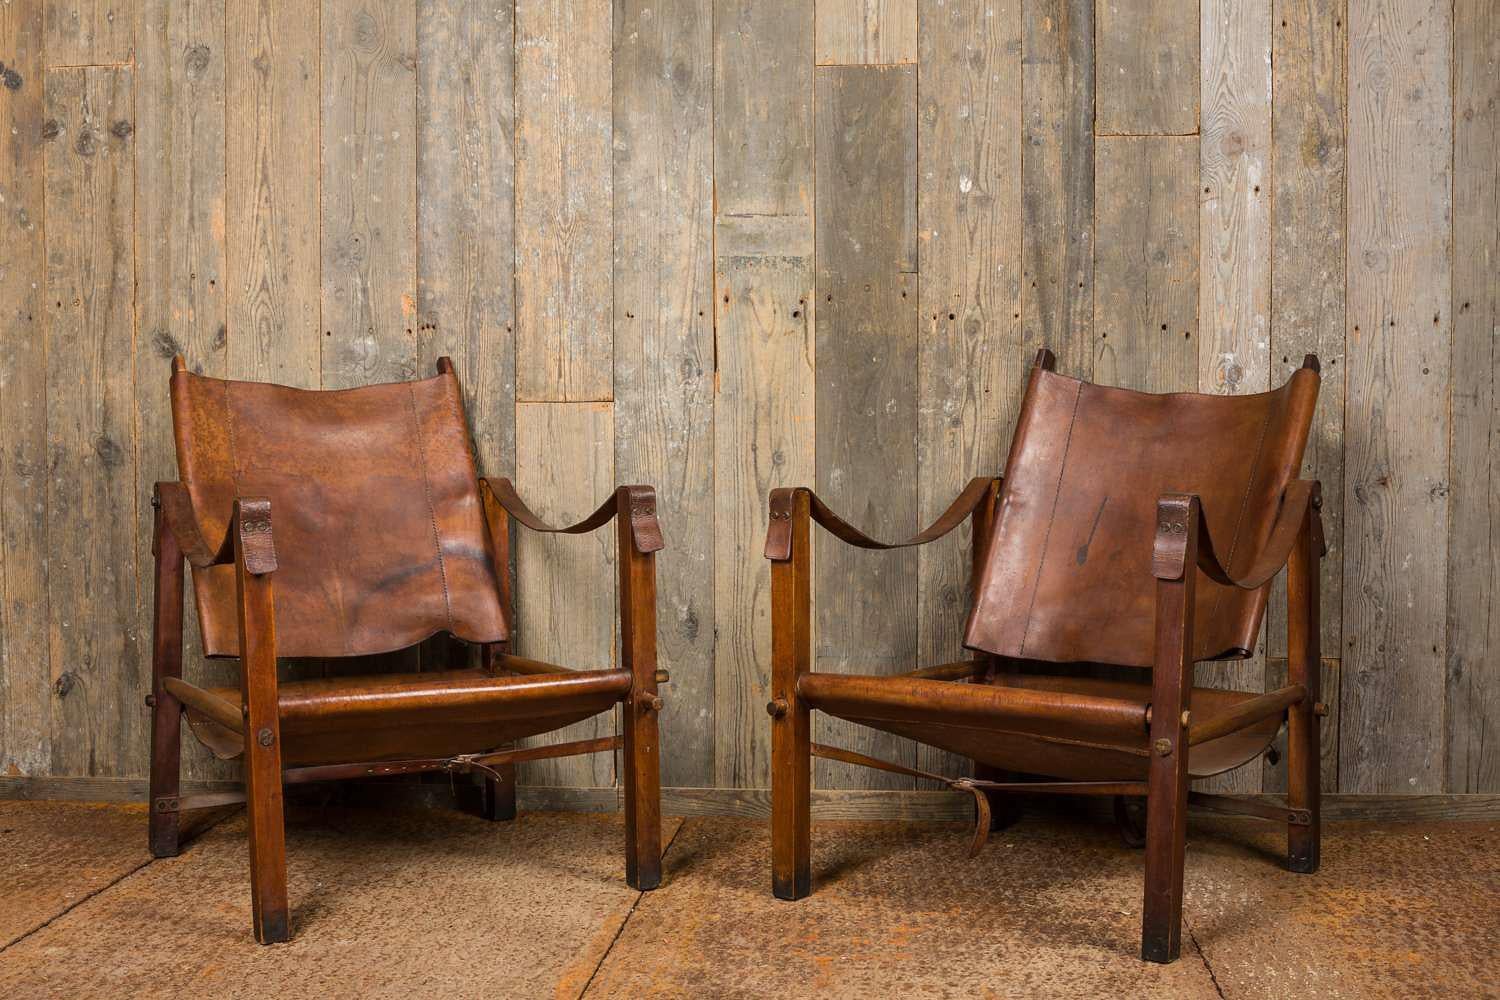 Pair of Scandinavian leather safari chairs in the manner of Arne Norell or Kaare Klint. Vintage armchairs with walnut wooden legs and pitch pine horizontals. The seating, the swing backrests, the armrests and leather belt straps are of brown /